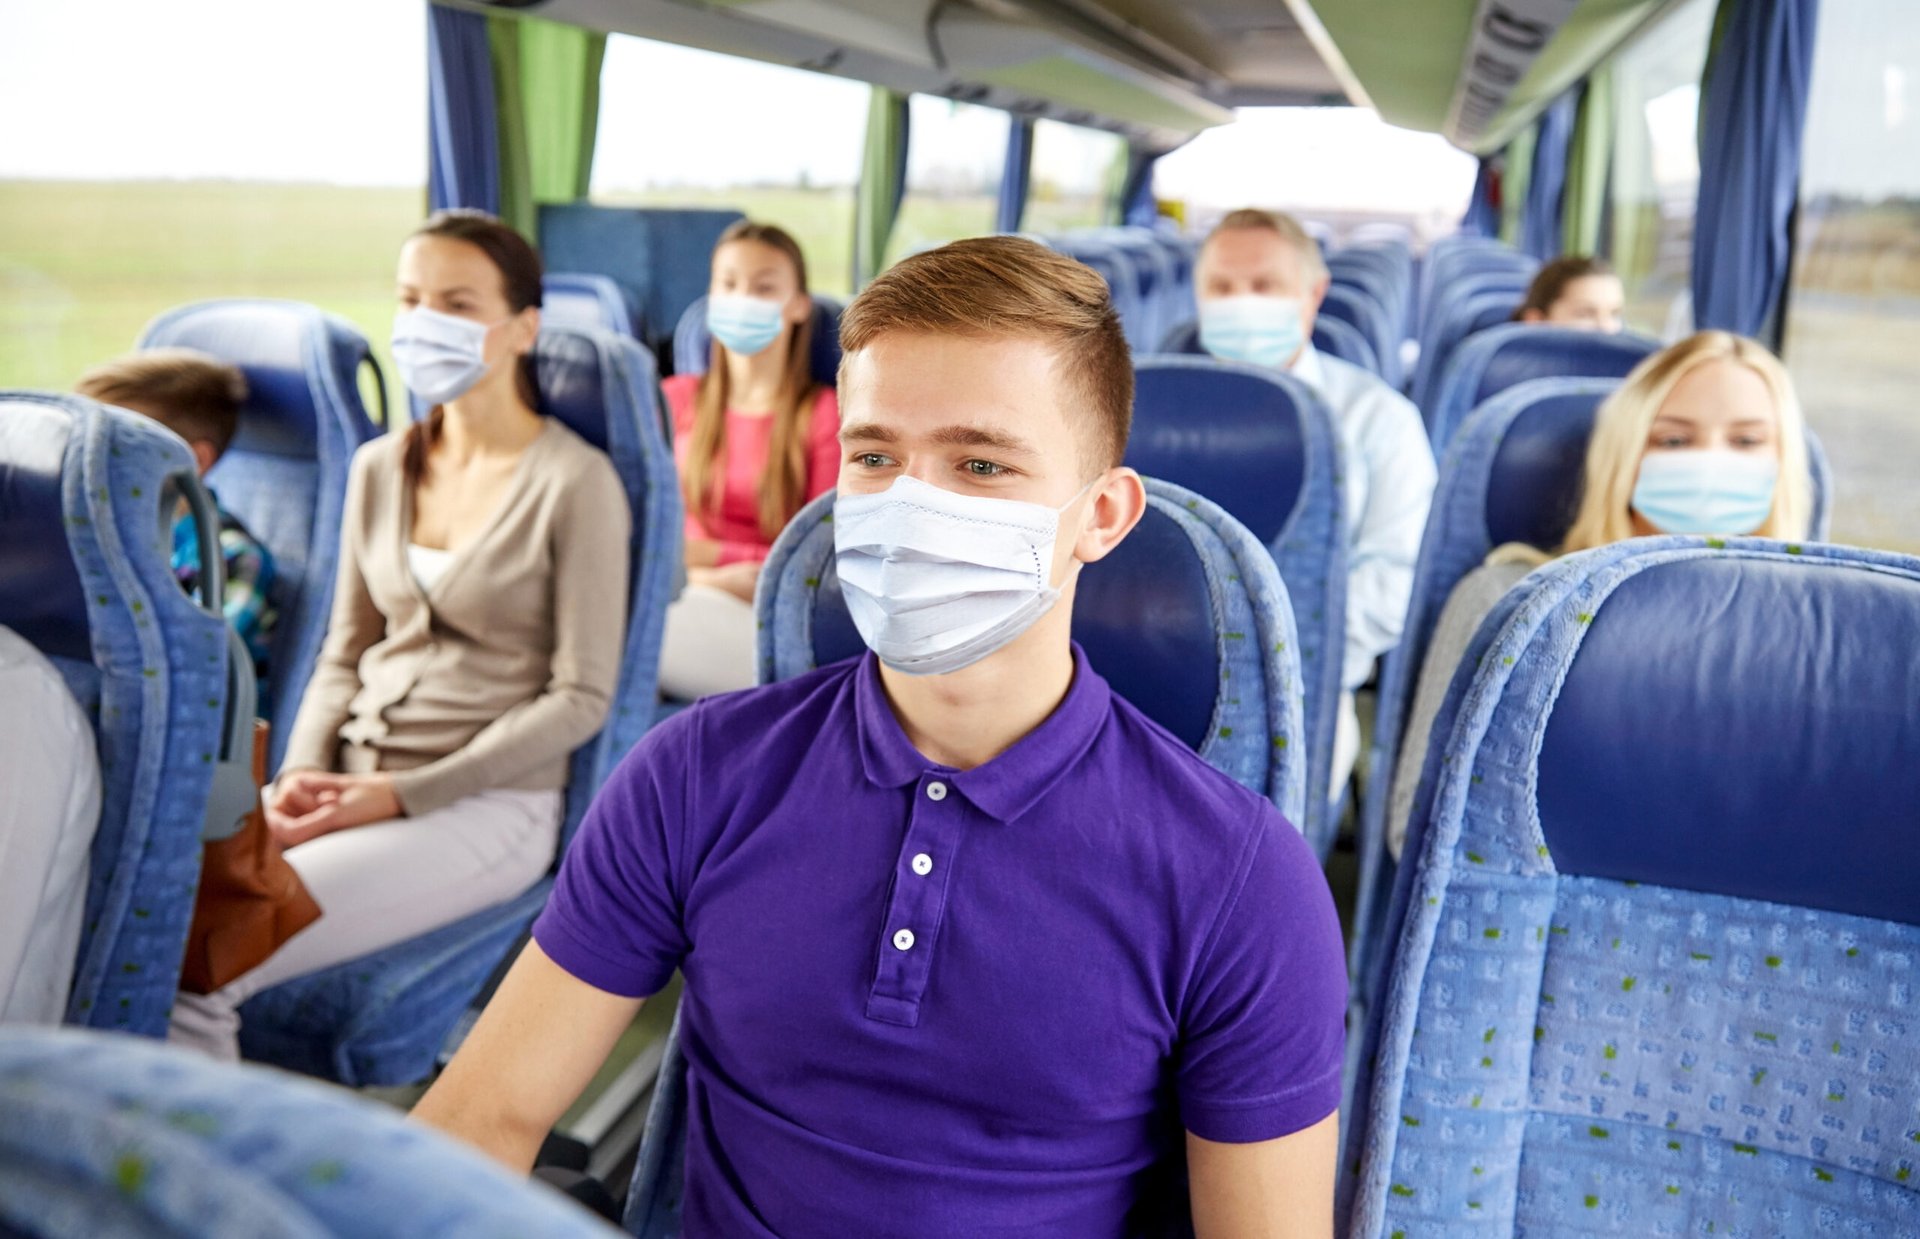 Teen wearing a mask on the bus